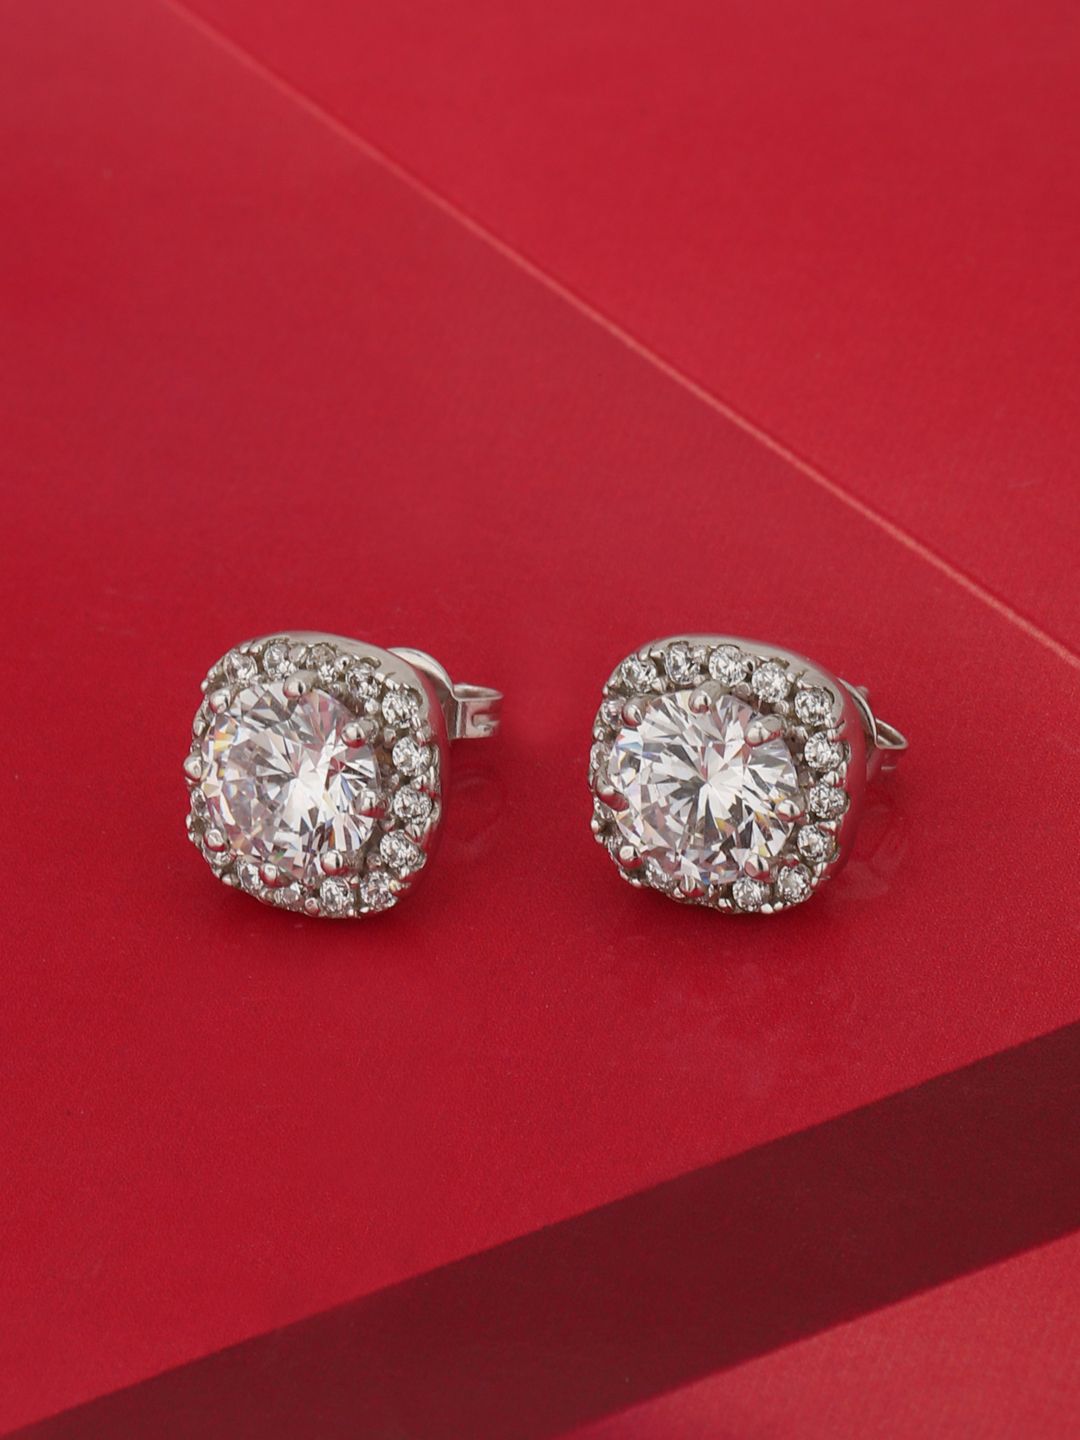 Carlton London Silver-Toned Rhodium-Plated CZ Studded Geometric Studs Price in India